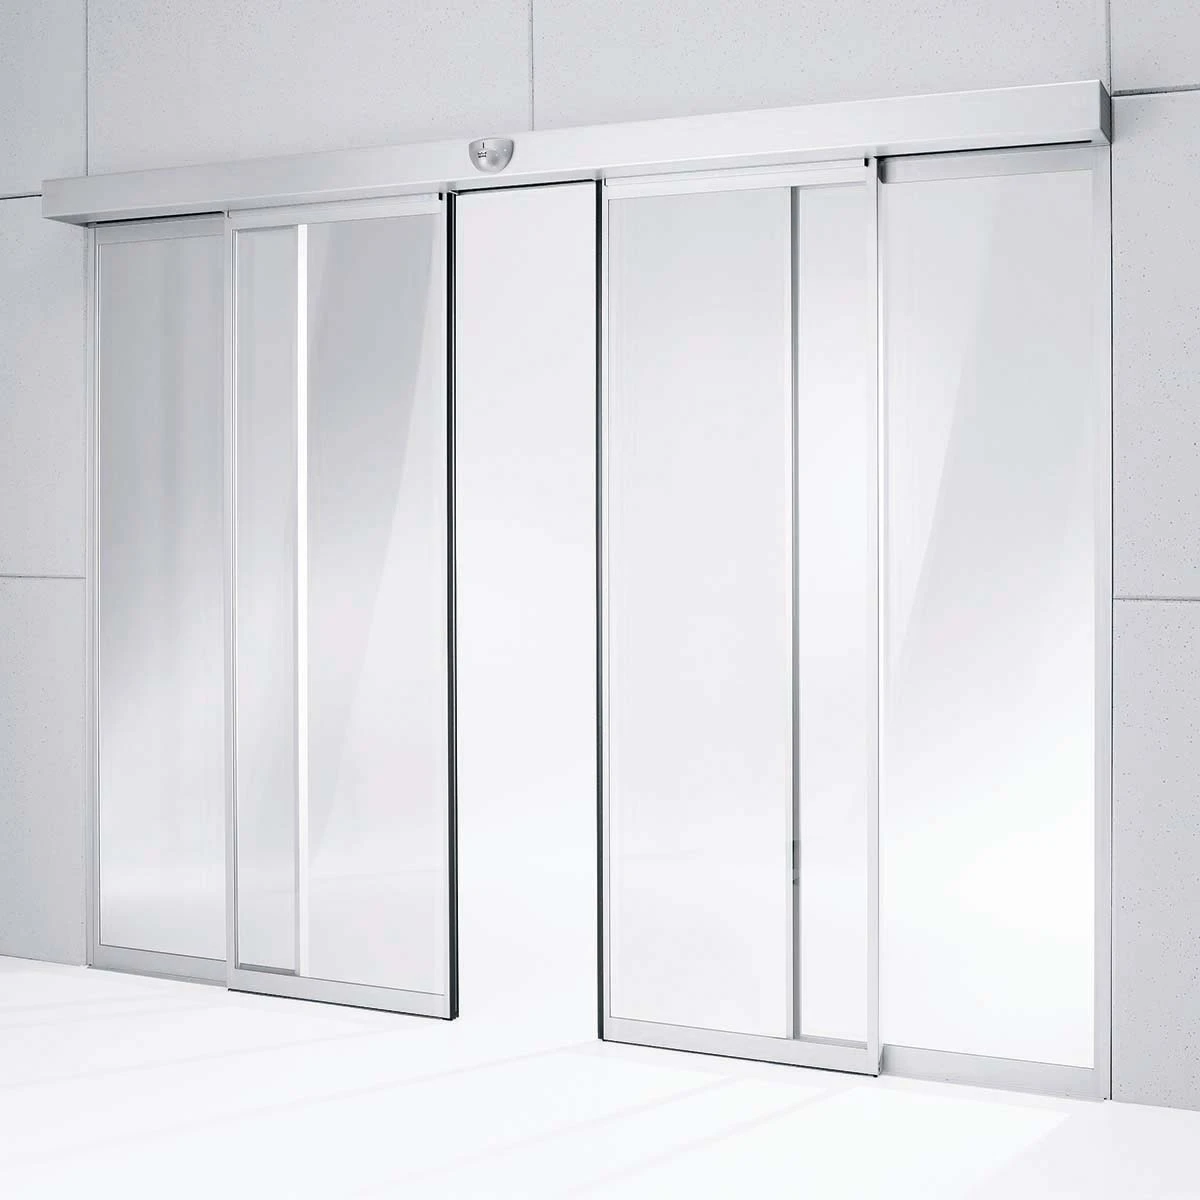 12mm tempered glass sliding office door wall panel cost